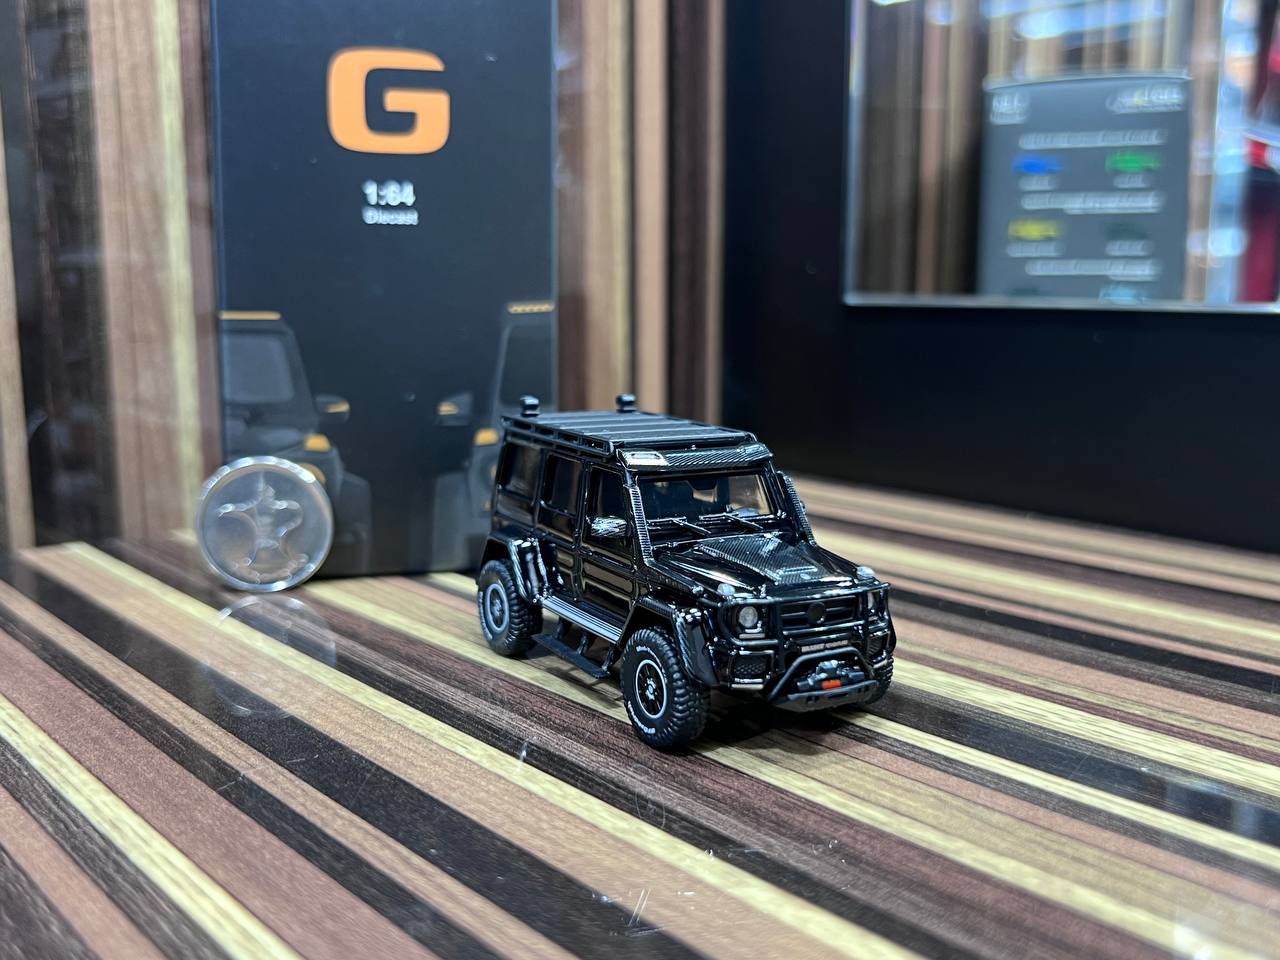 1/18 Diecast Mercedes-Benz G55 Brabus 4x4 Adventure Almost Real Scale Model Car